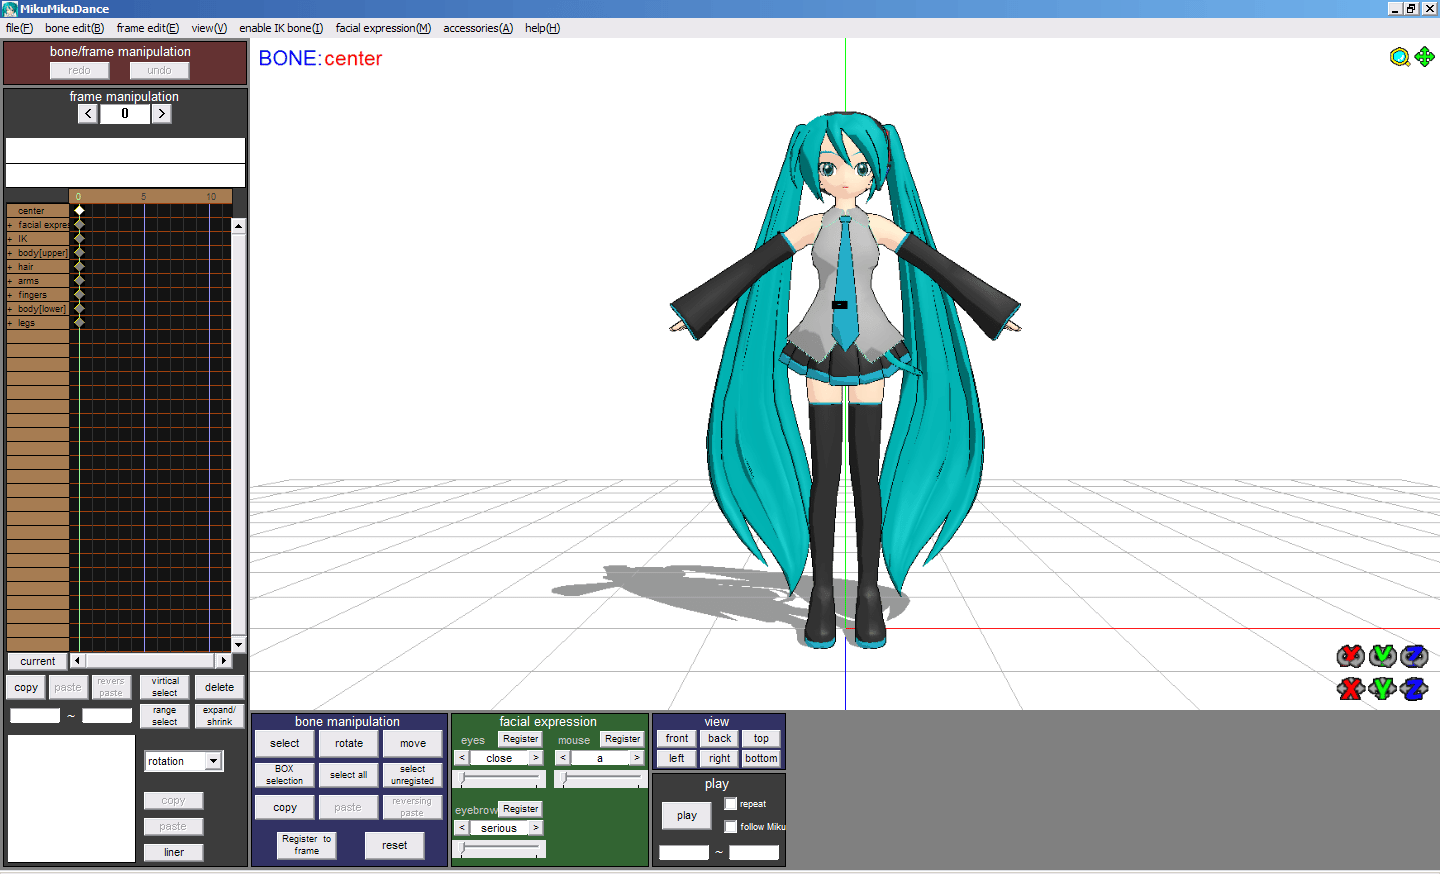 Hatsune Miku being posed in MiukMikuDance software, commonly used for UTAU